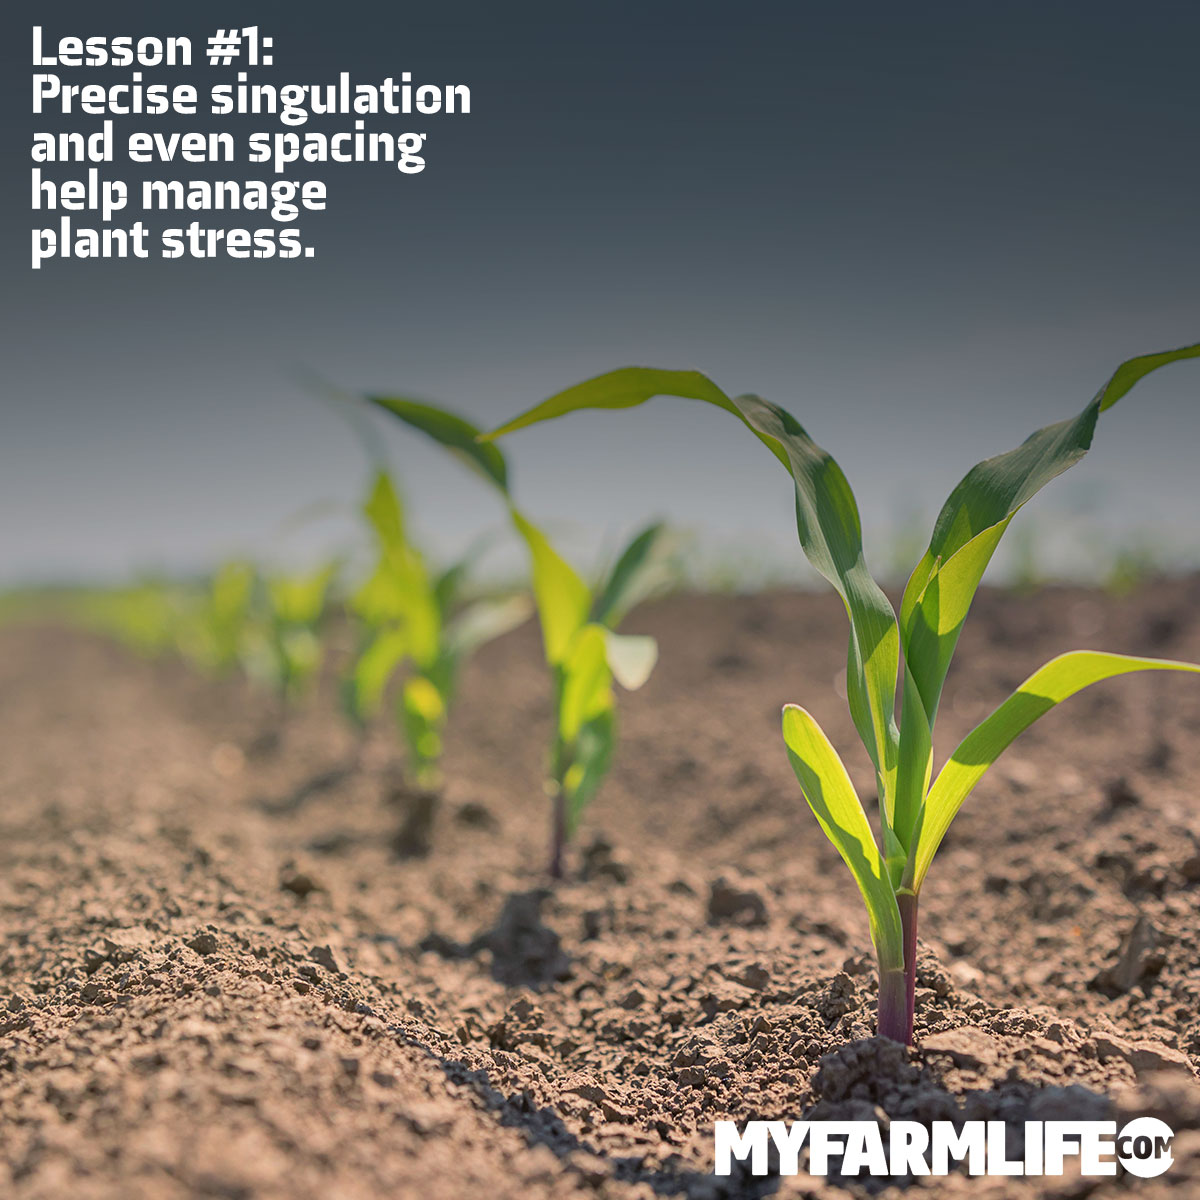 Lesson #1: Precise singulation and even spacing help manage plant stress.